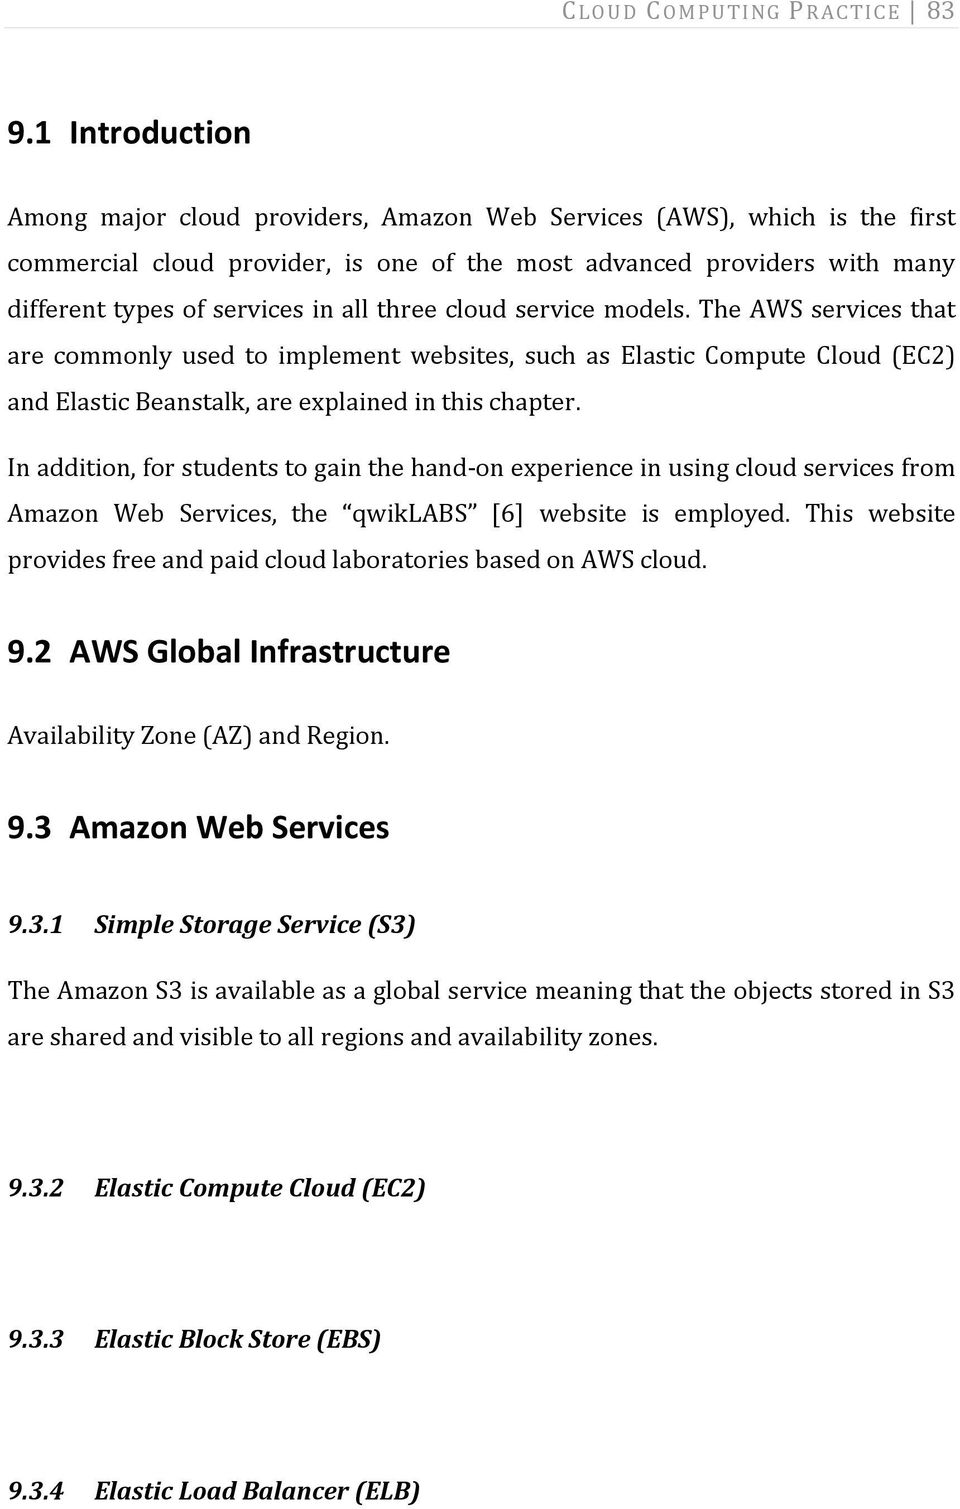 three cloud service models. The AWS services that are commonly used to implement websites, such as Elastic Compute Cloud (EC2) and Elastic Beanstalk, are explained in this chapter.